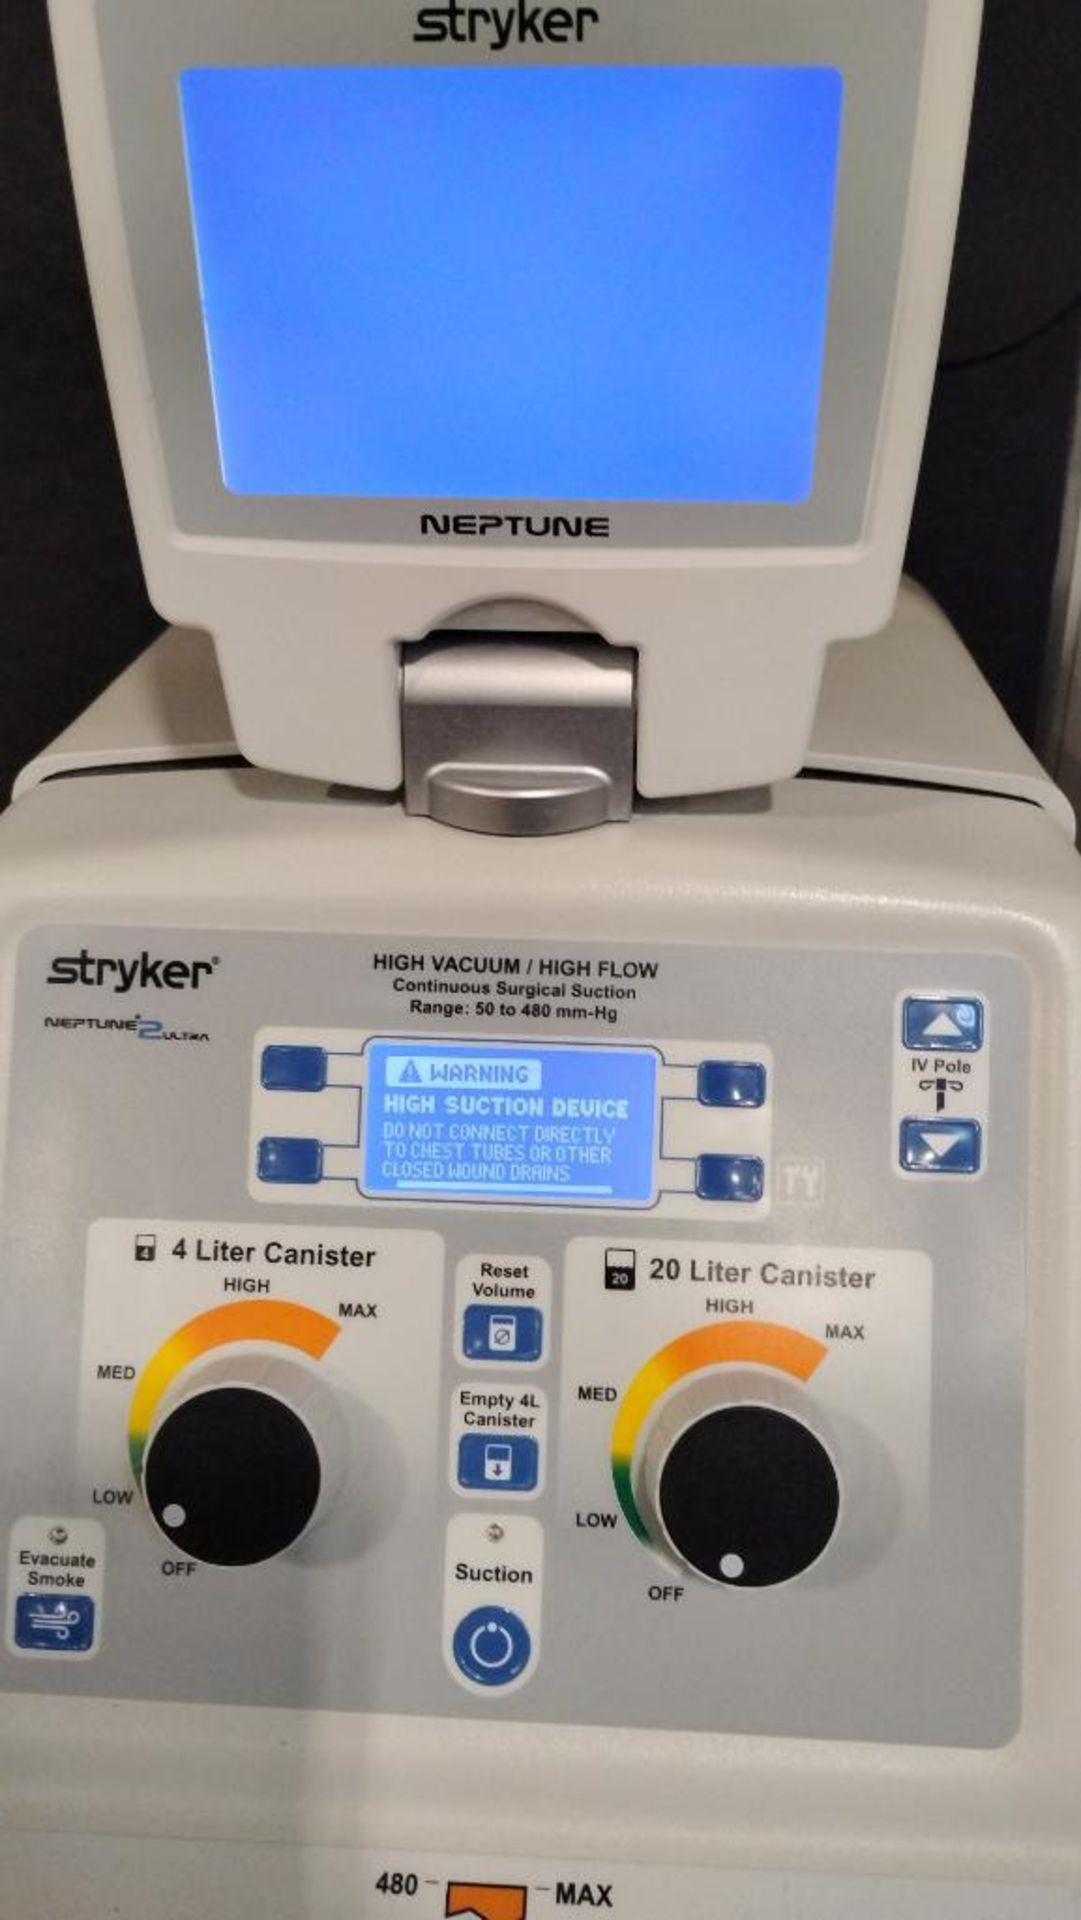 STRYKER NEPTUNE 2 ULTRA HIGH VACUUM/ HIGH FLOW CONTINOUS SURGICAL SUCTION UNIT